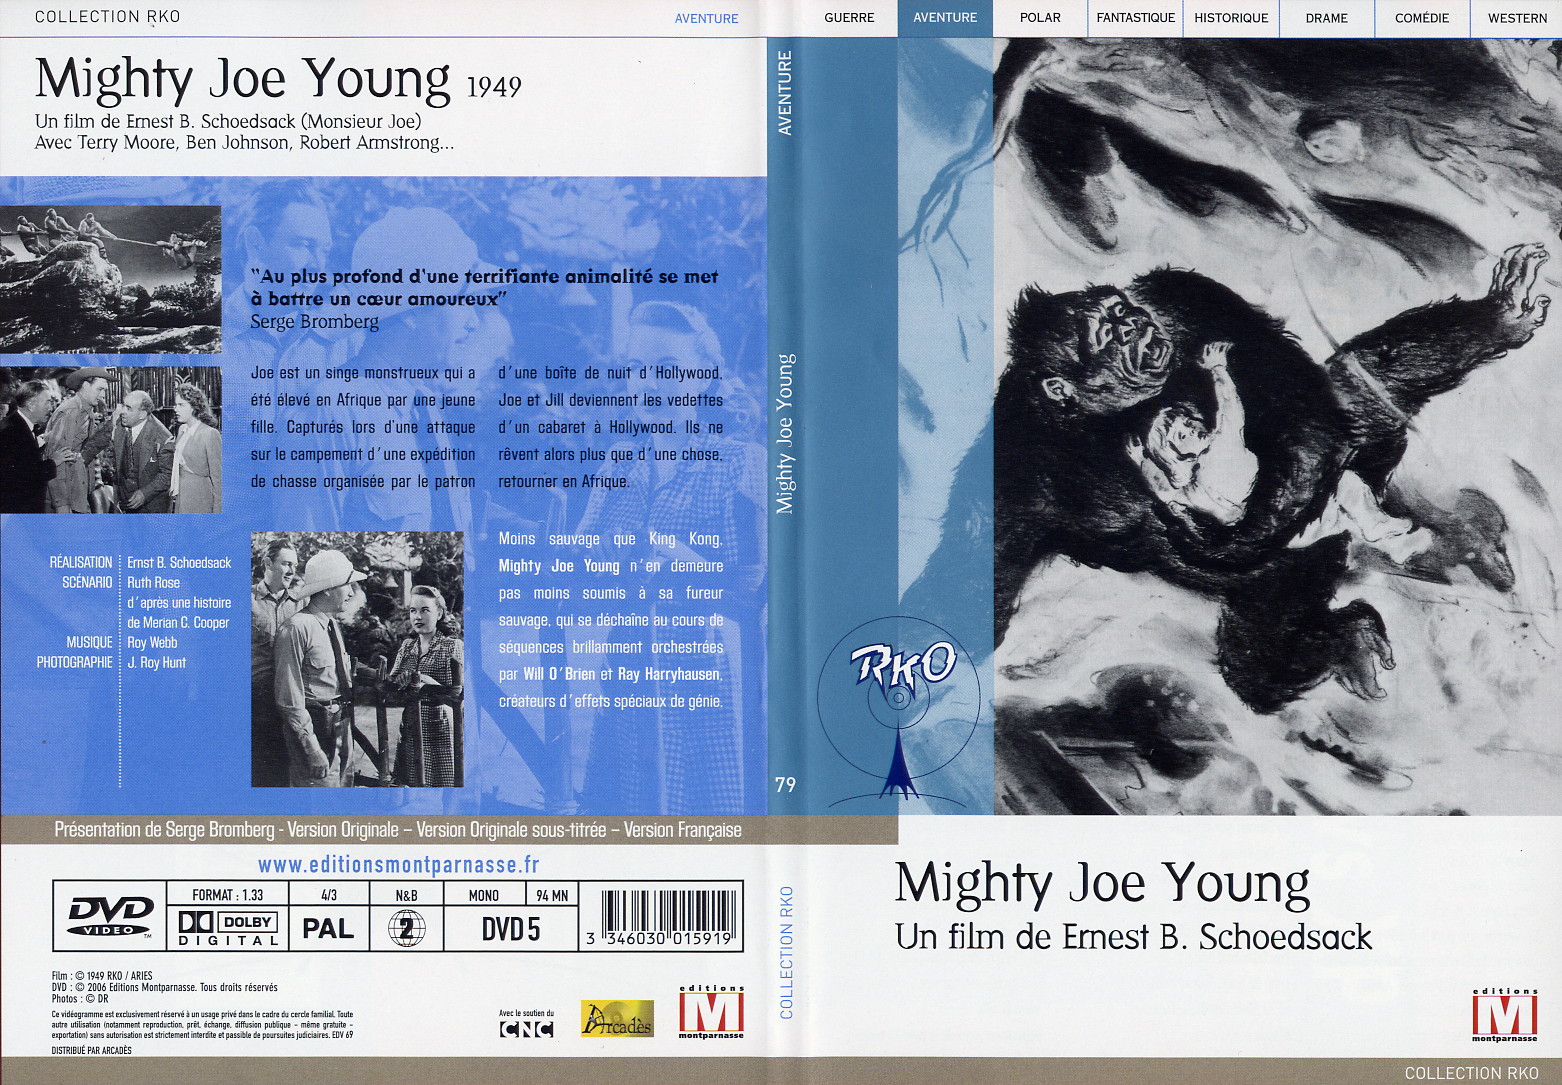 Jaquette DVD Mighty Joe Young